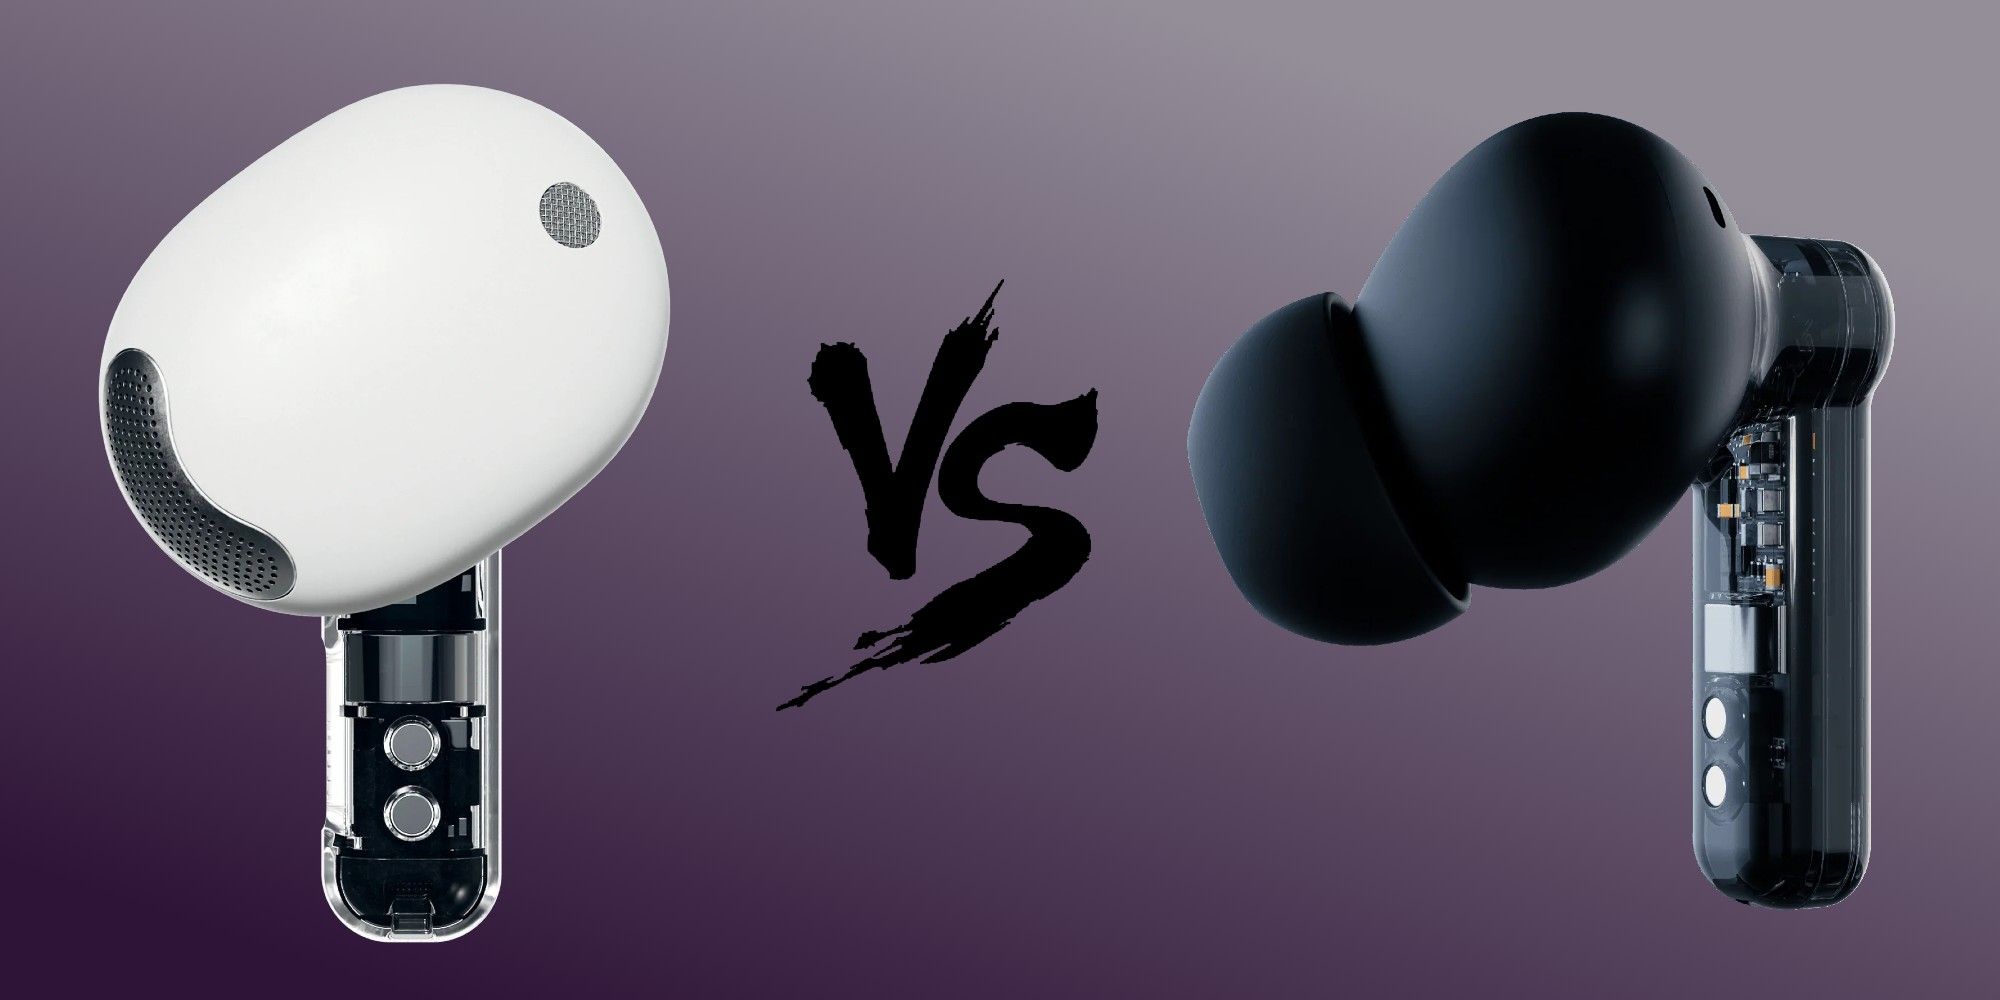 Nothing Ear (1) vs Nothing Ear (Stick) vs Competition